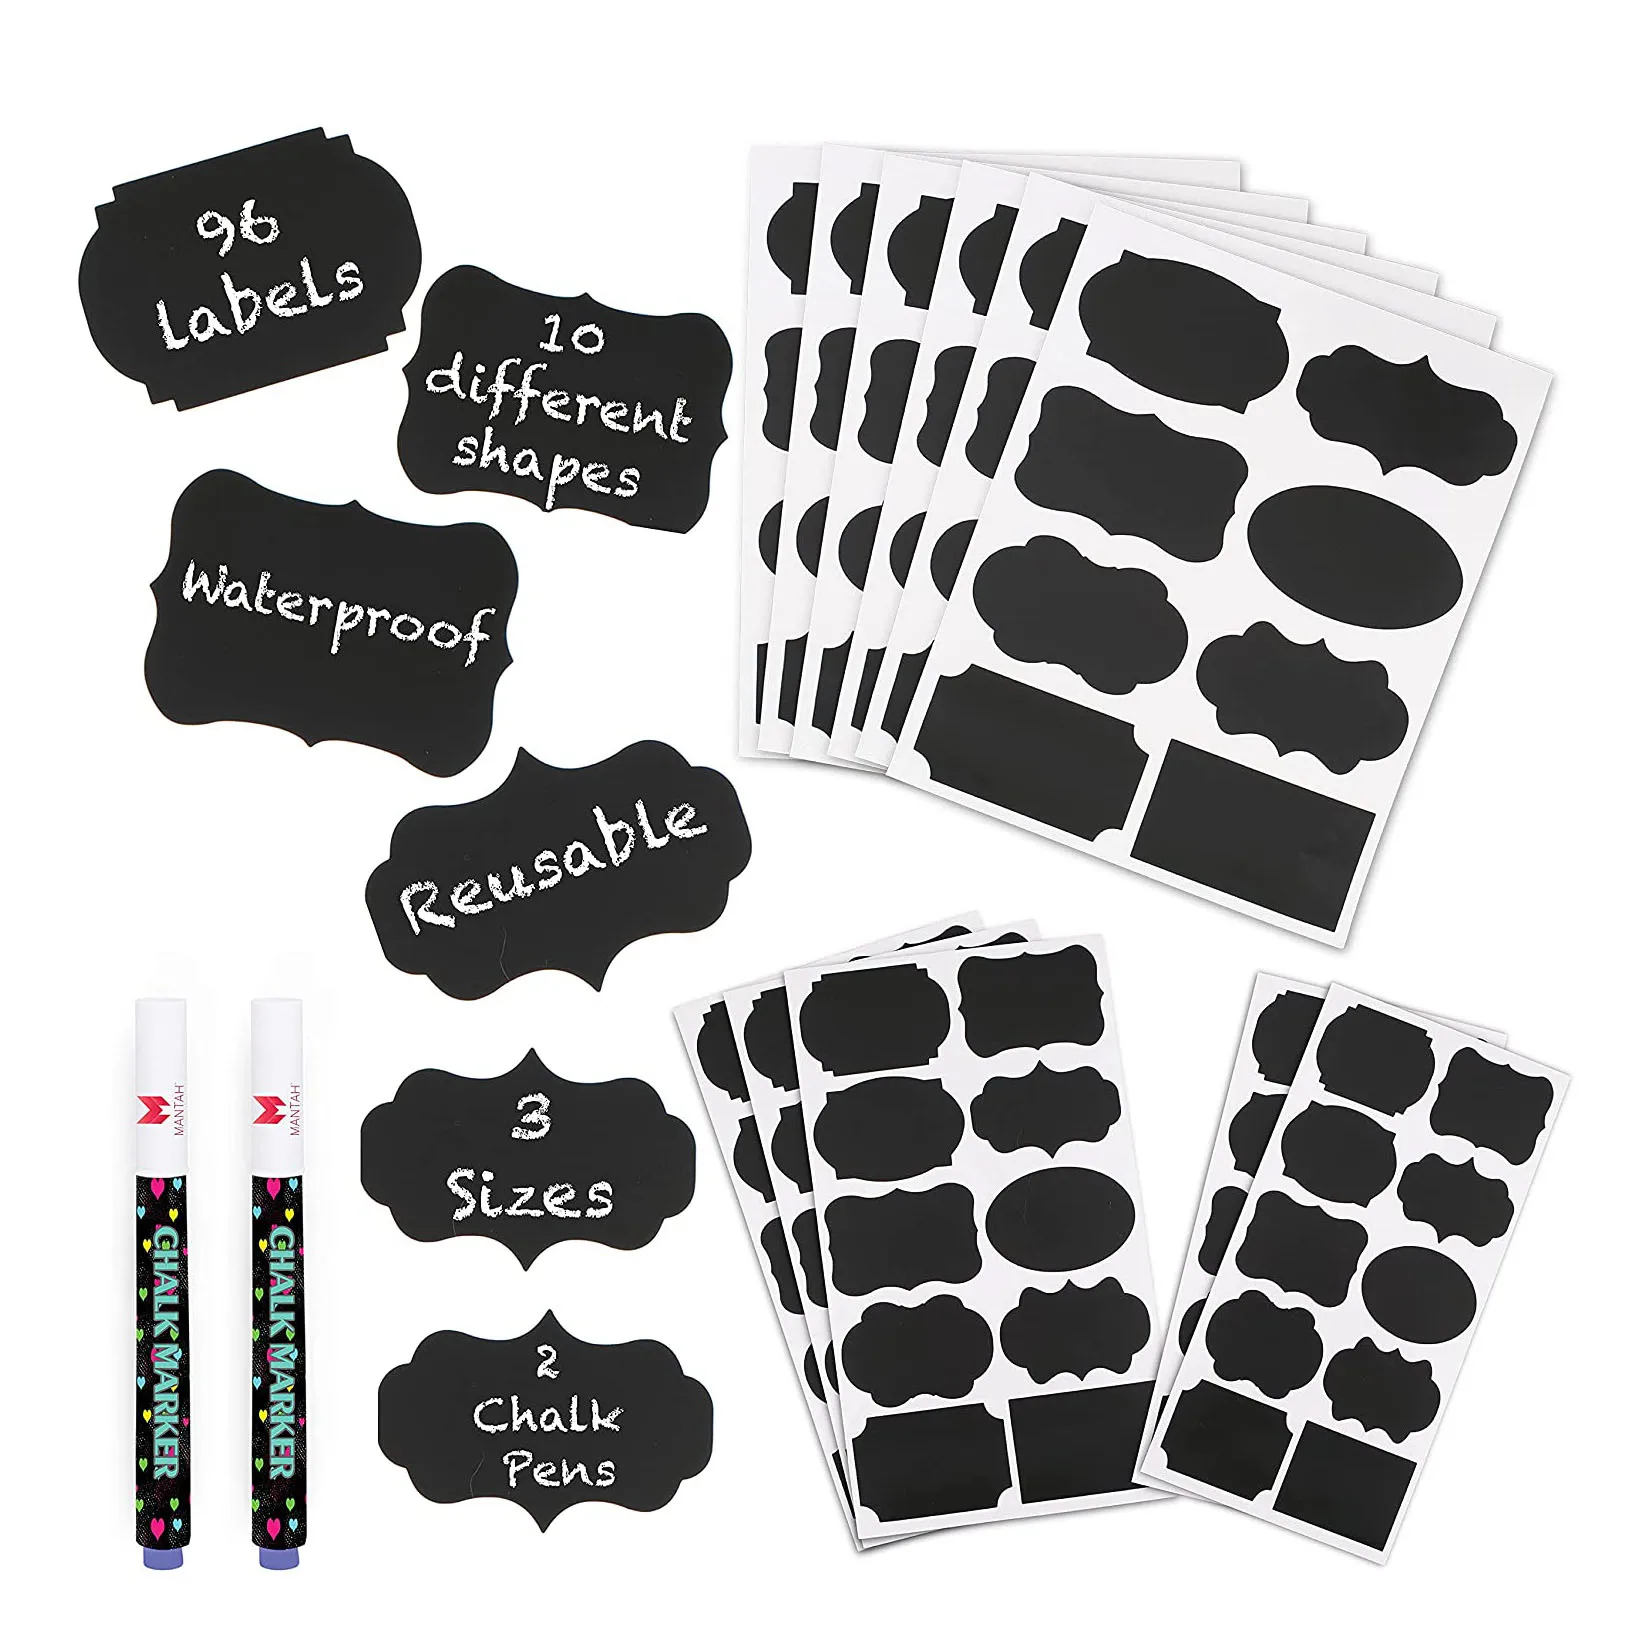 

Chalkboard Label Stickers 96pcs - 9 Assorted Shapes in 3 sizes with 2 Erasable White Chalk Marker, Reusable Waterproof Labels